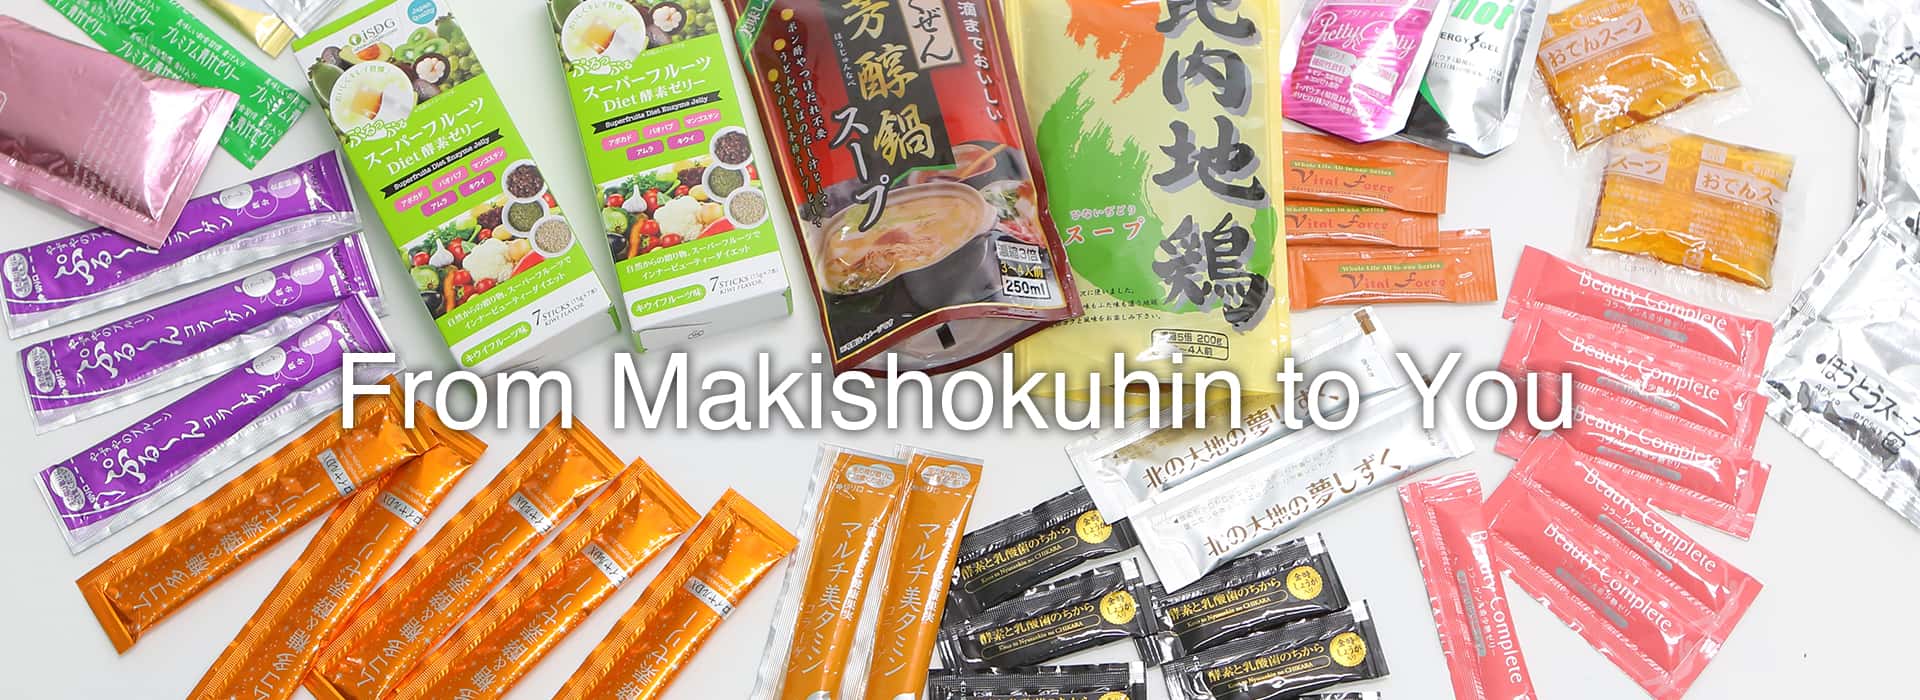 Healthy and Reliable Introducing Makishokuhin’ Products